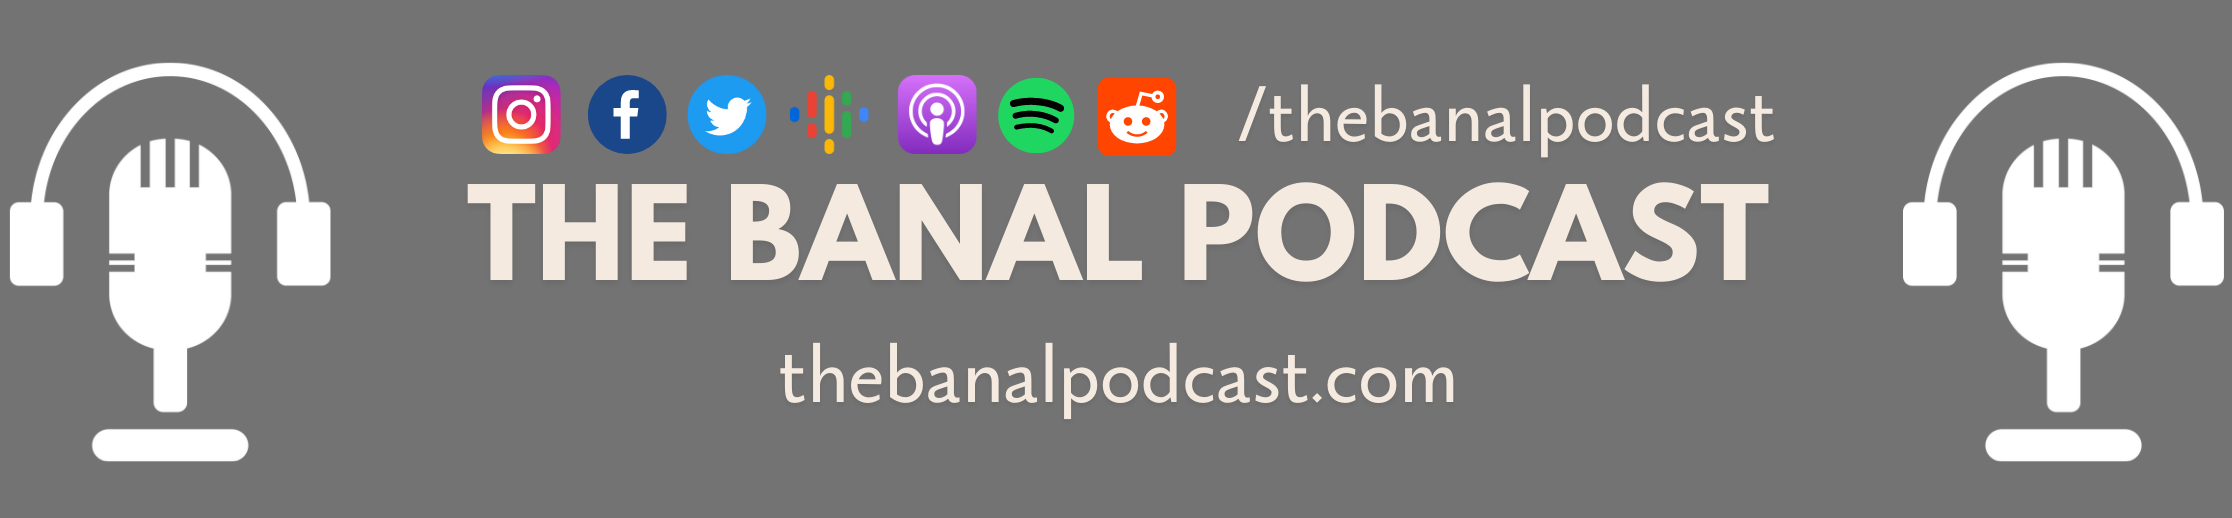 The banal podcast